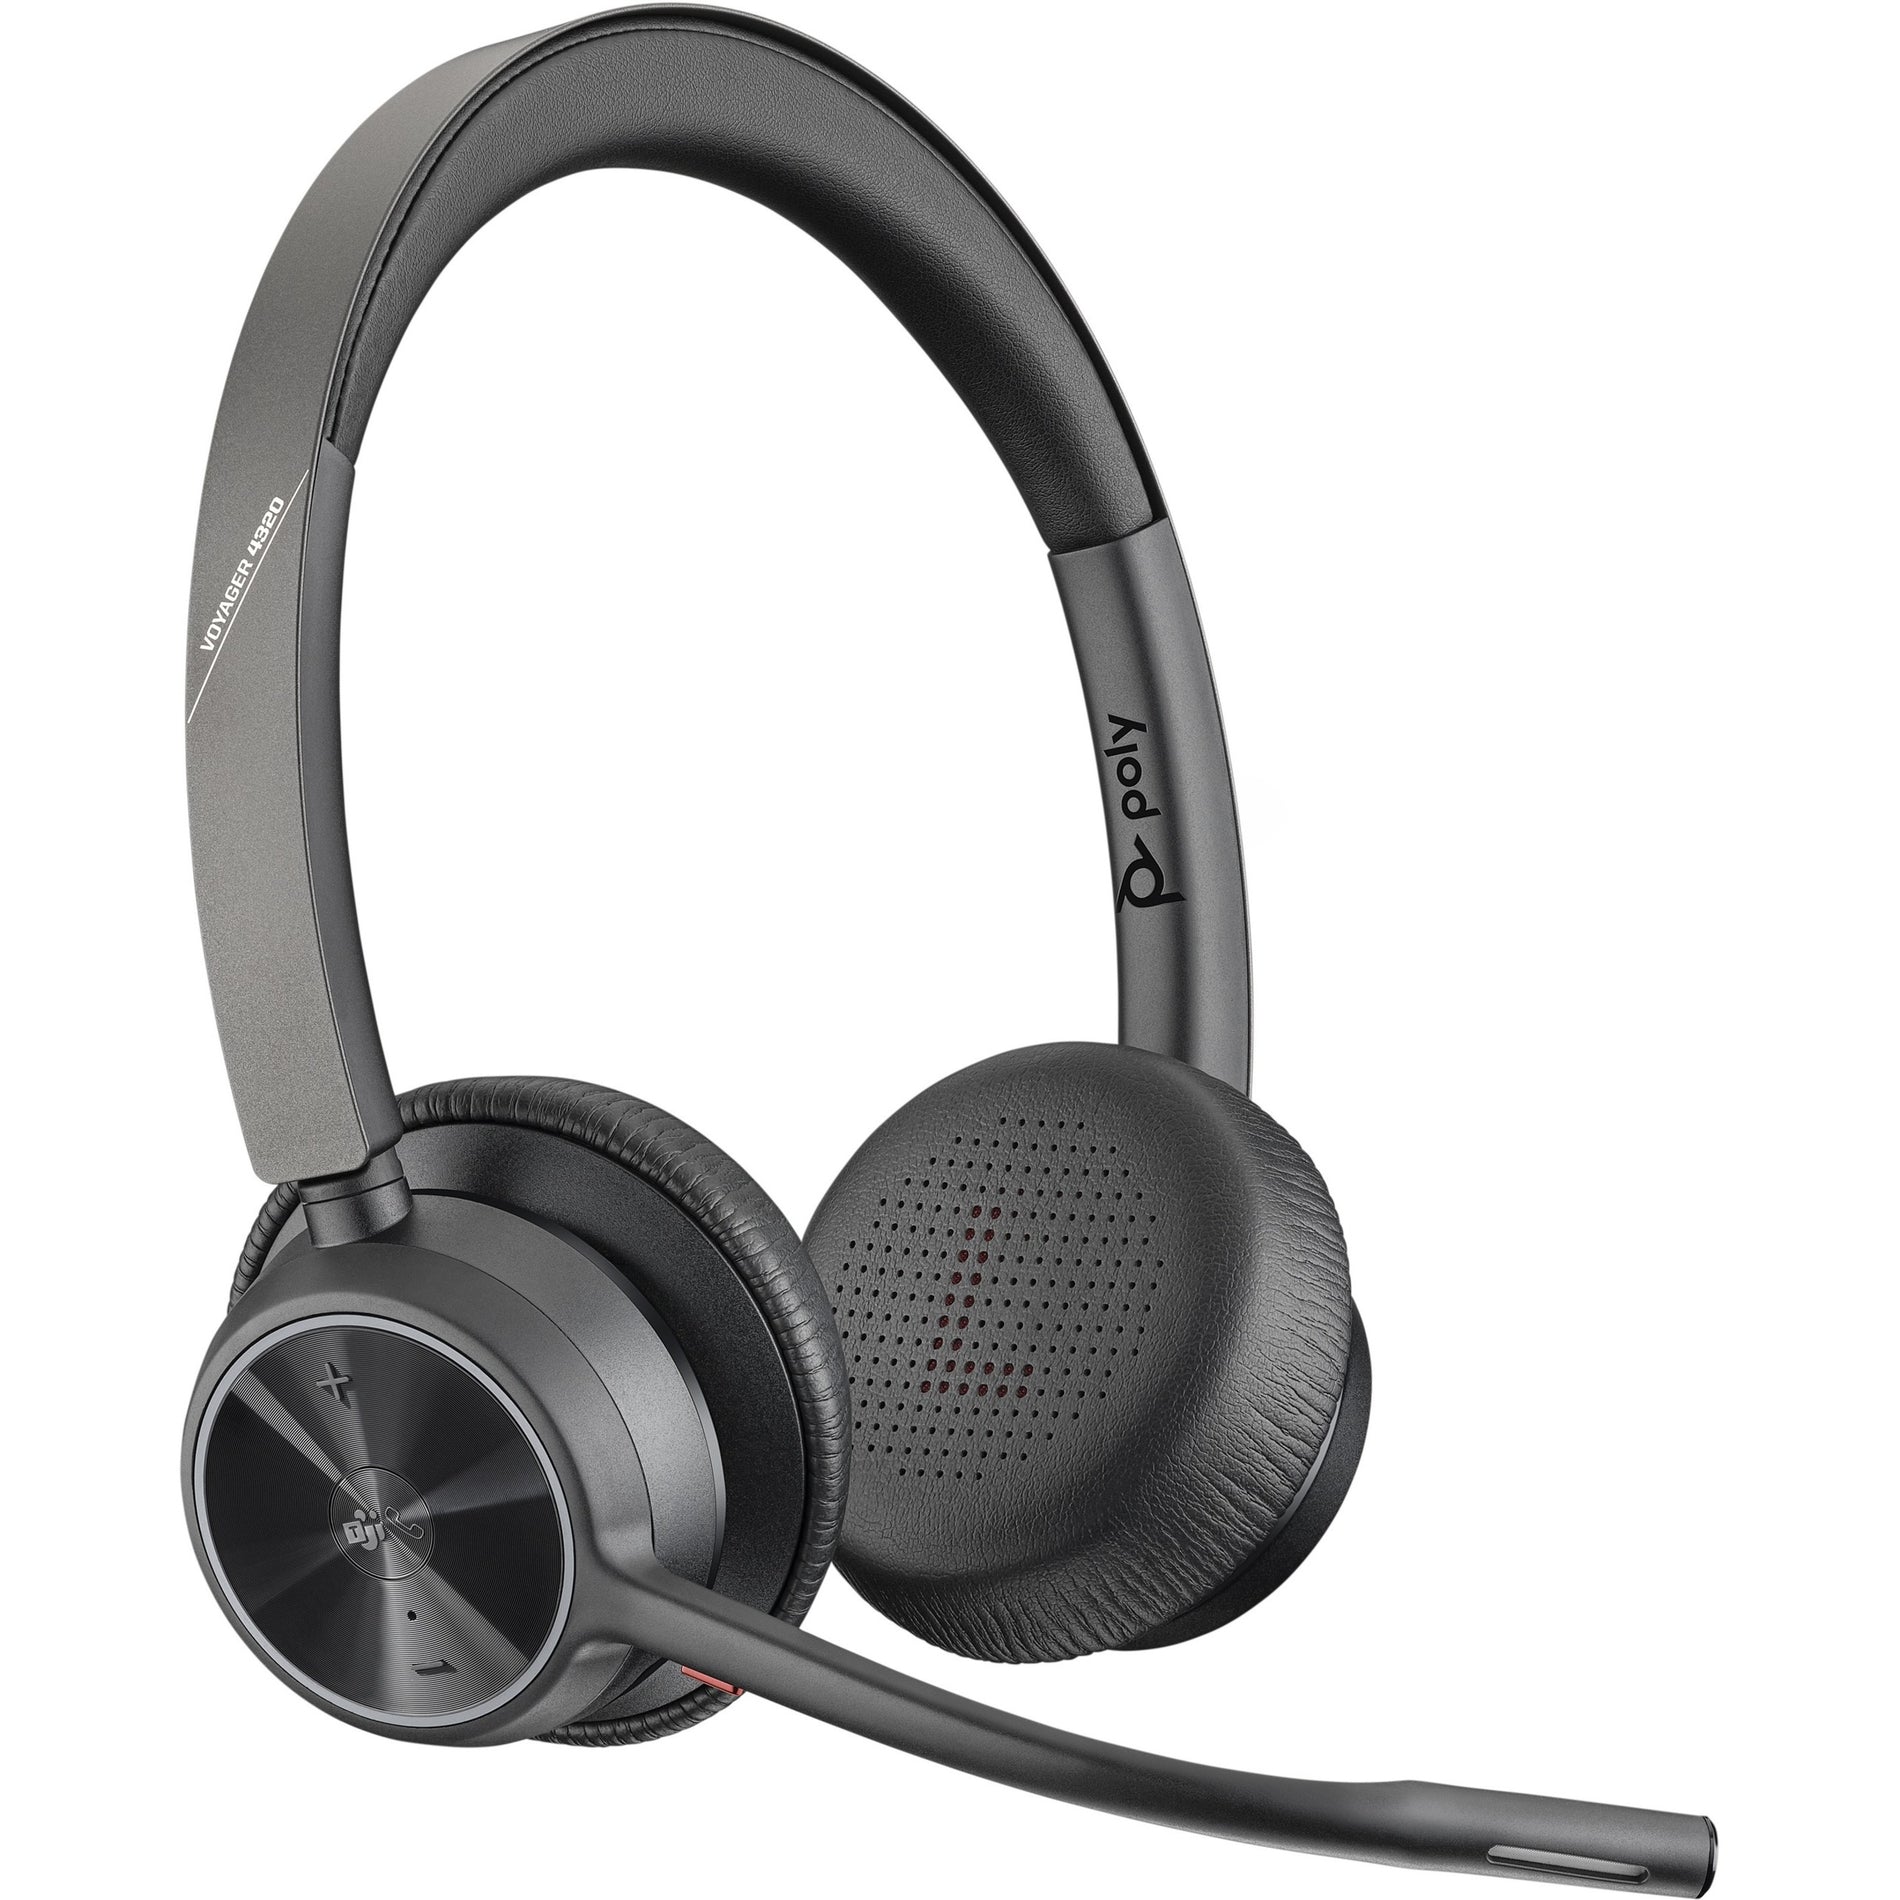 Poly 218475-02 Voyager 4300 UC 4320-M Headset, Wireless Bluetooth Stereo Headset with Noise Cancelling Microphone